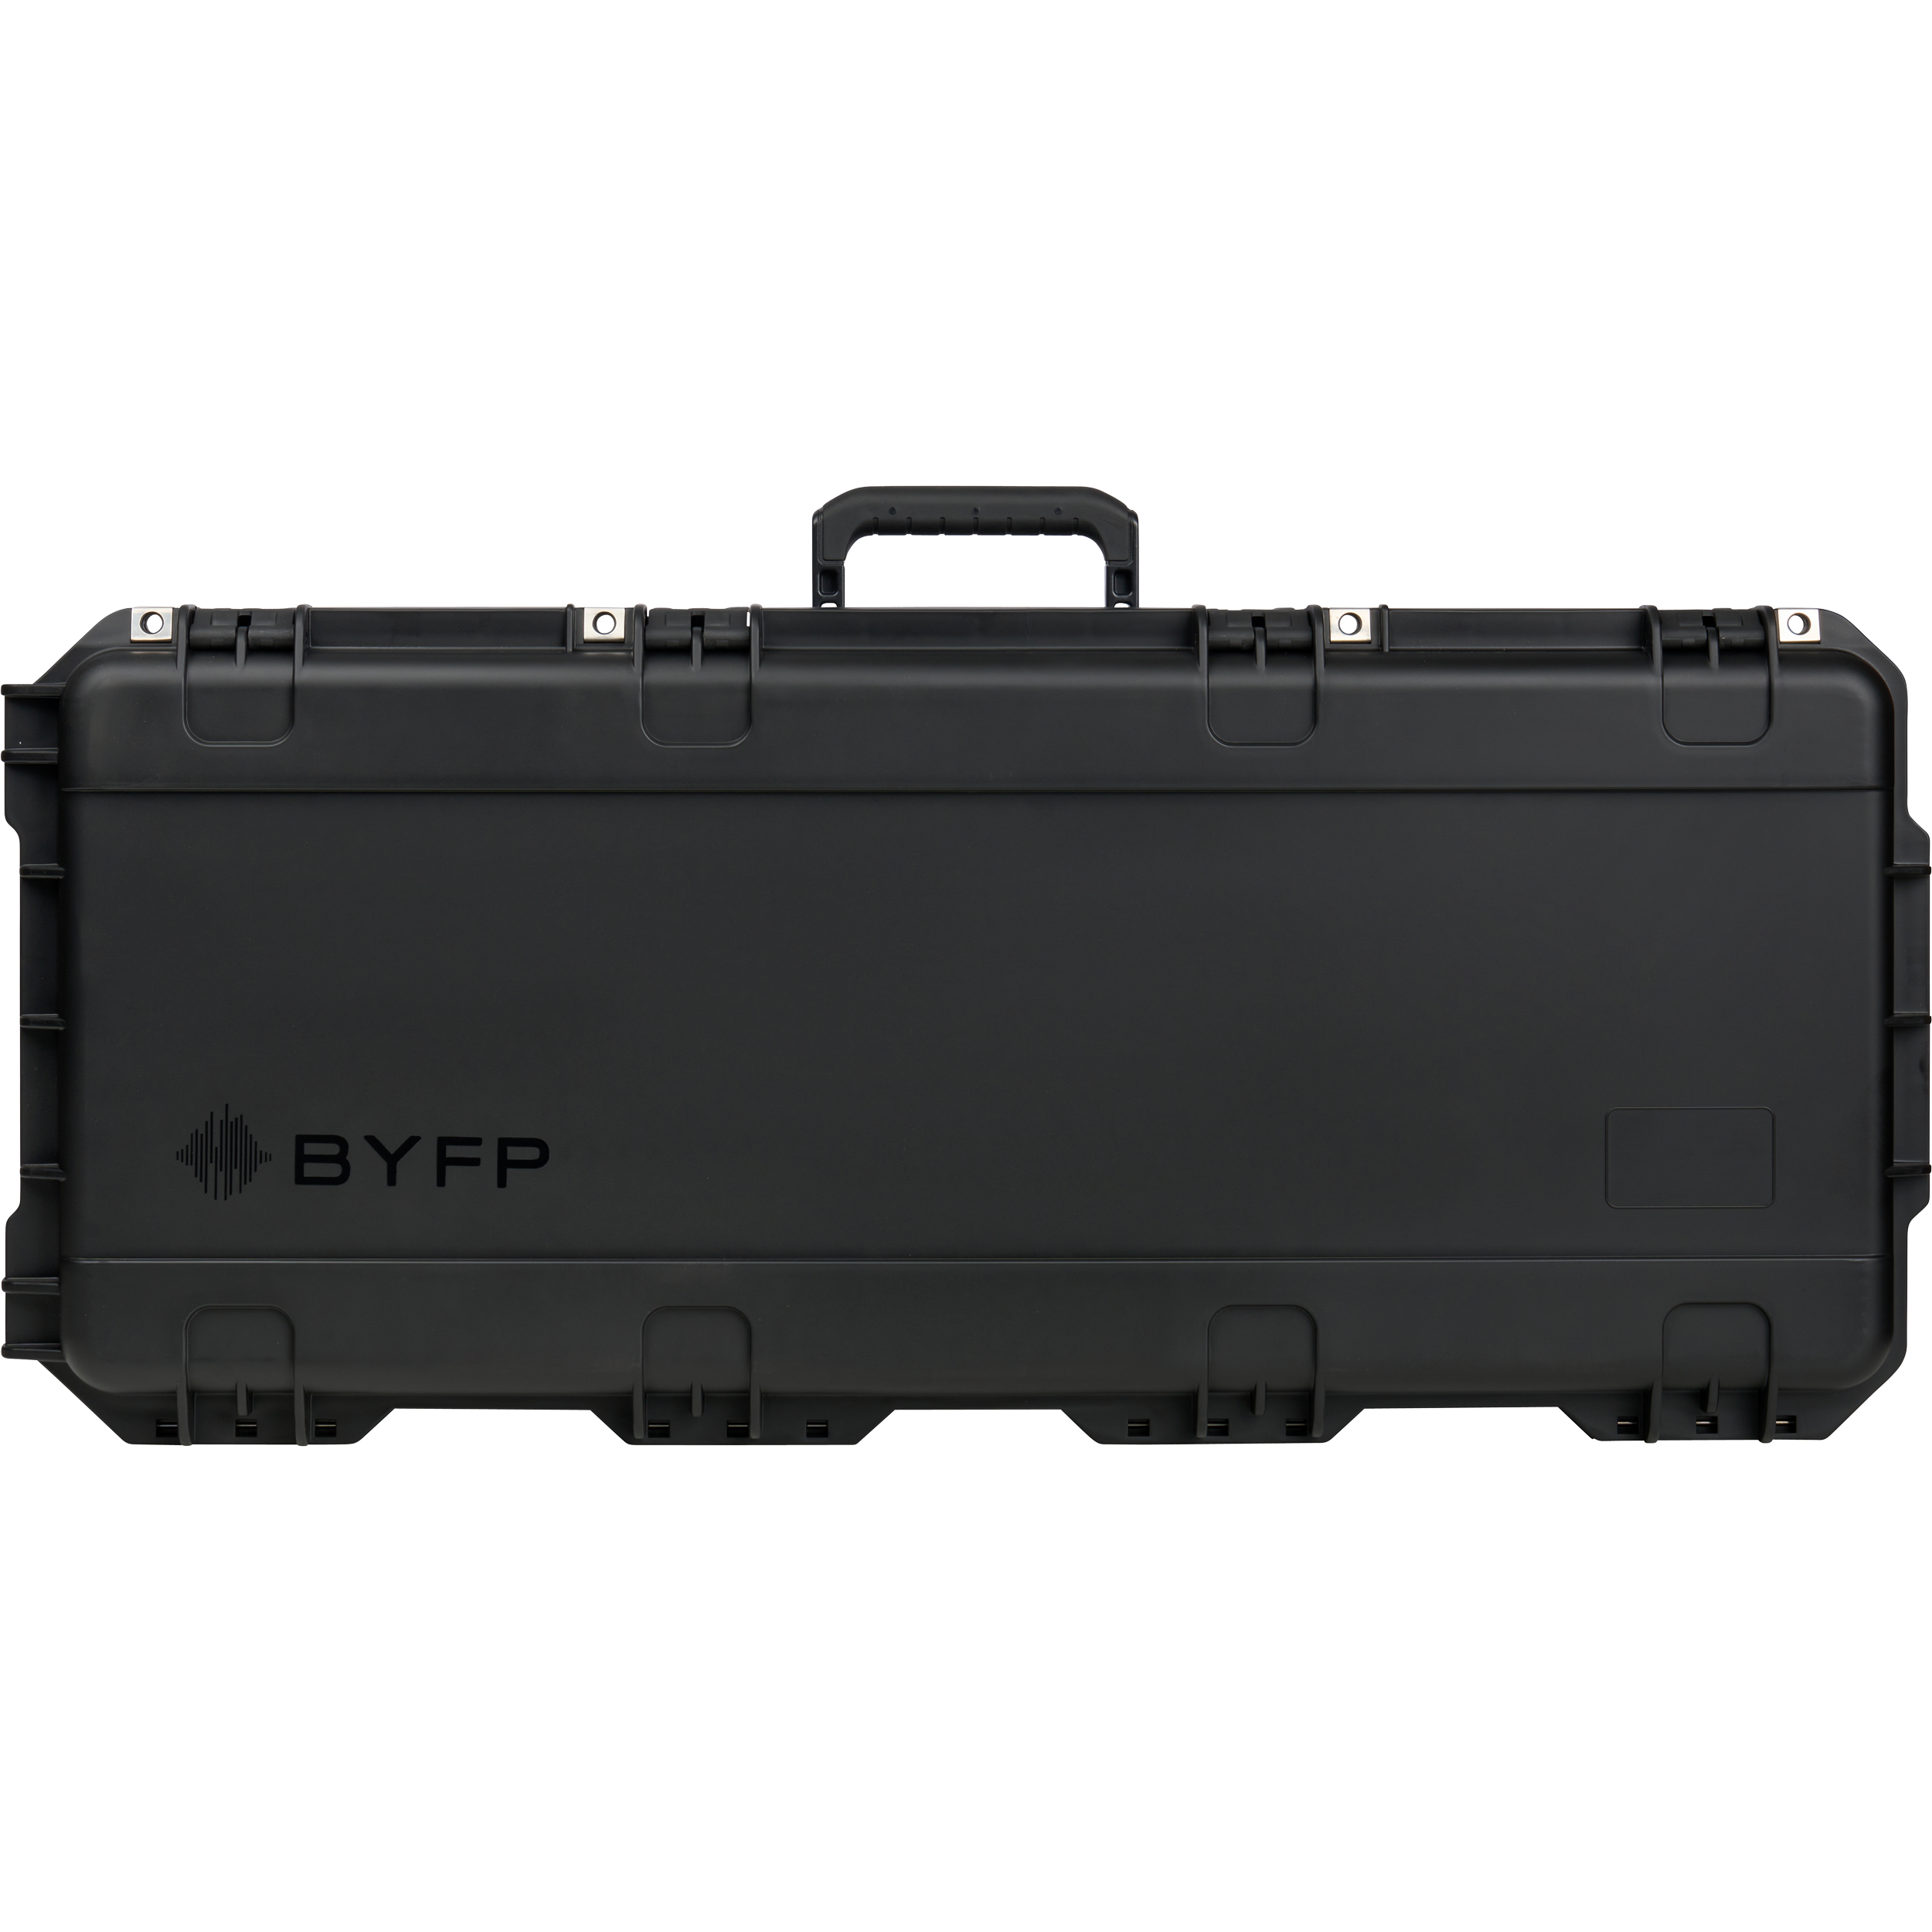 BYFP ipCase for 3x Microphone Stands